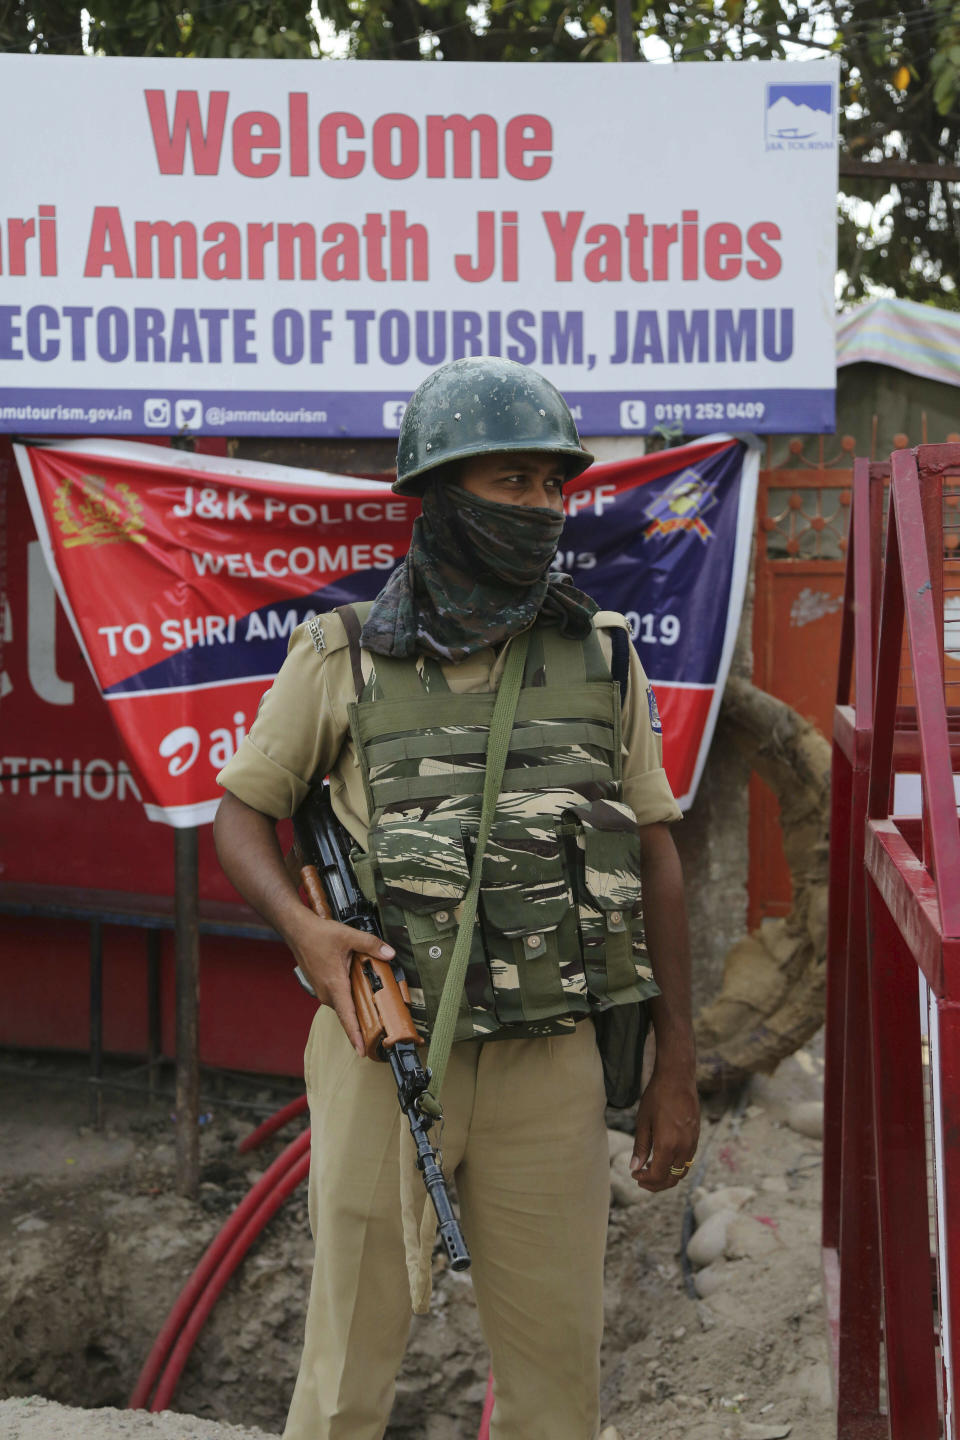 An Indian paramilitary soldier guards outside a base camp for the annual pilgrimage to the Amarnath cave shrine in Jammu, India, Monday, July 1, 2019. Thousands of Hindu pilgrims began the arduous trek to an icy Himalayan cave in disputed Kashmir on Monday, with tens of thousands of Indian government forces guarding roads and mountain passes. (AP Photo/Channi Anand)